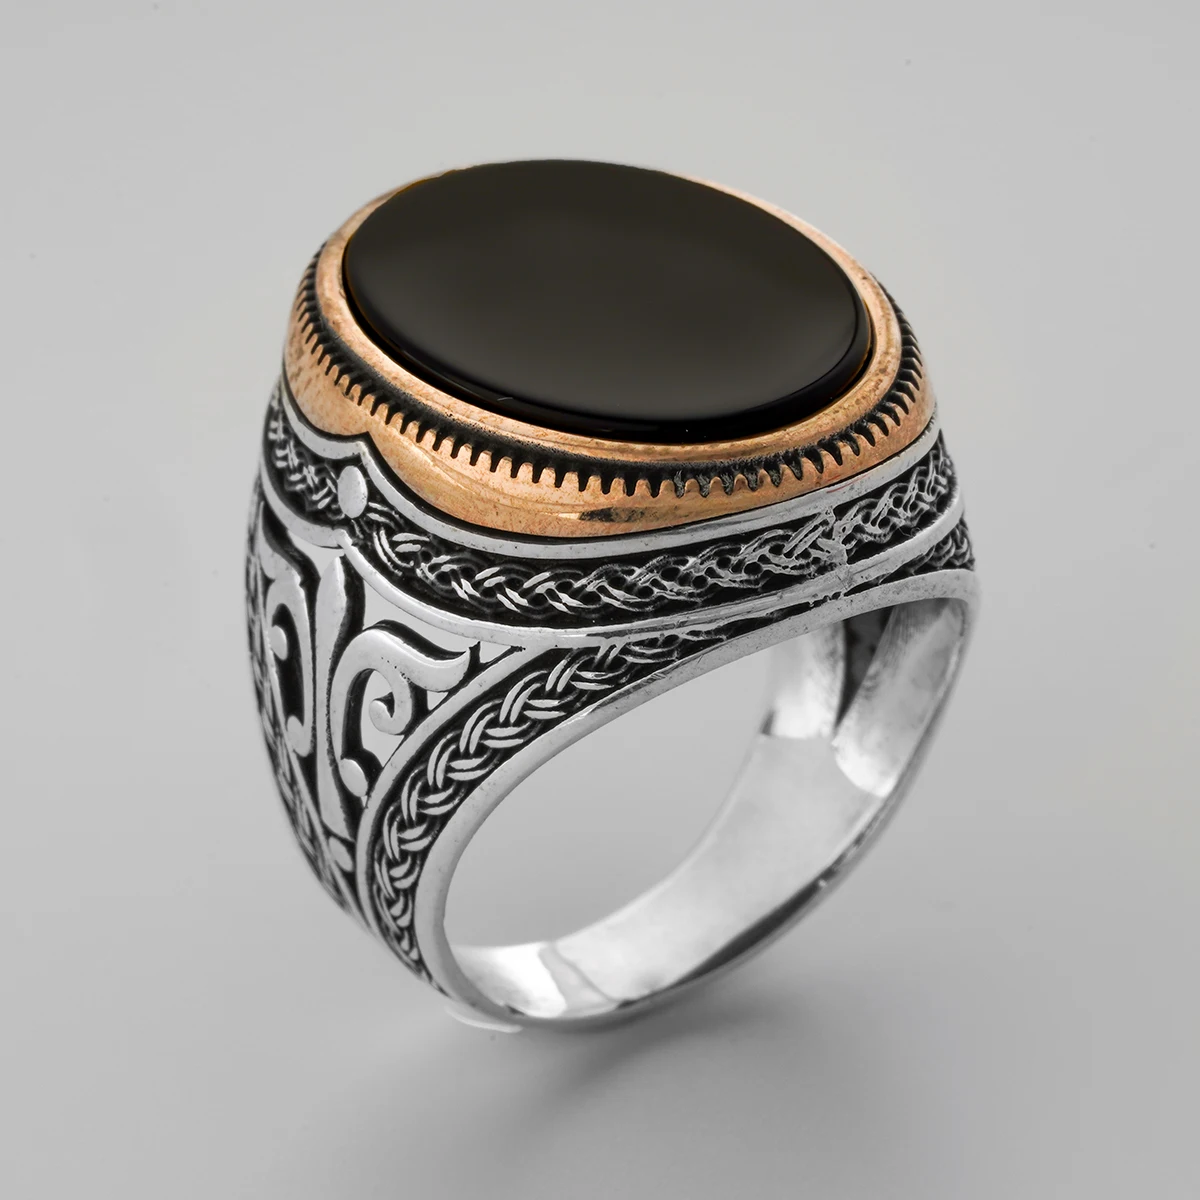 925-sterling-silver-for-men-rings-onyx-tiger-eyes-zirkon-stone-high-quality-polishing-middle-east-turkish-jewelry-all-size